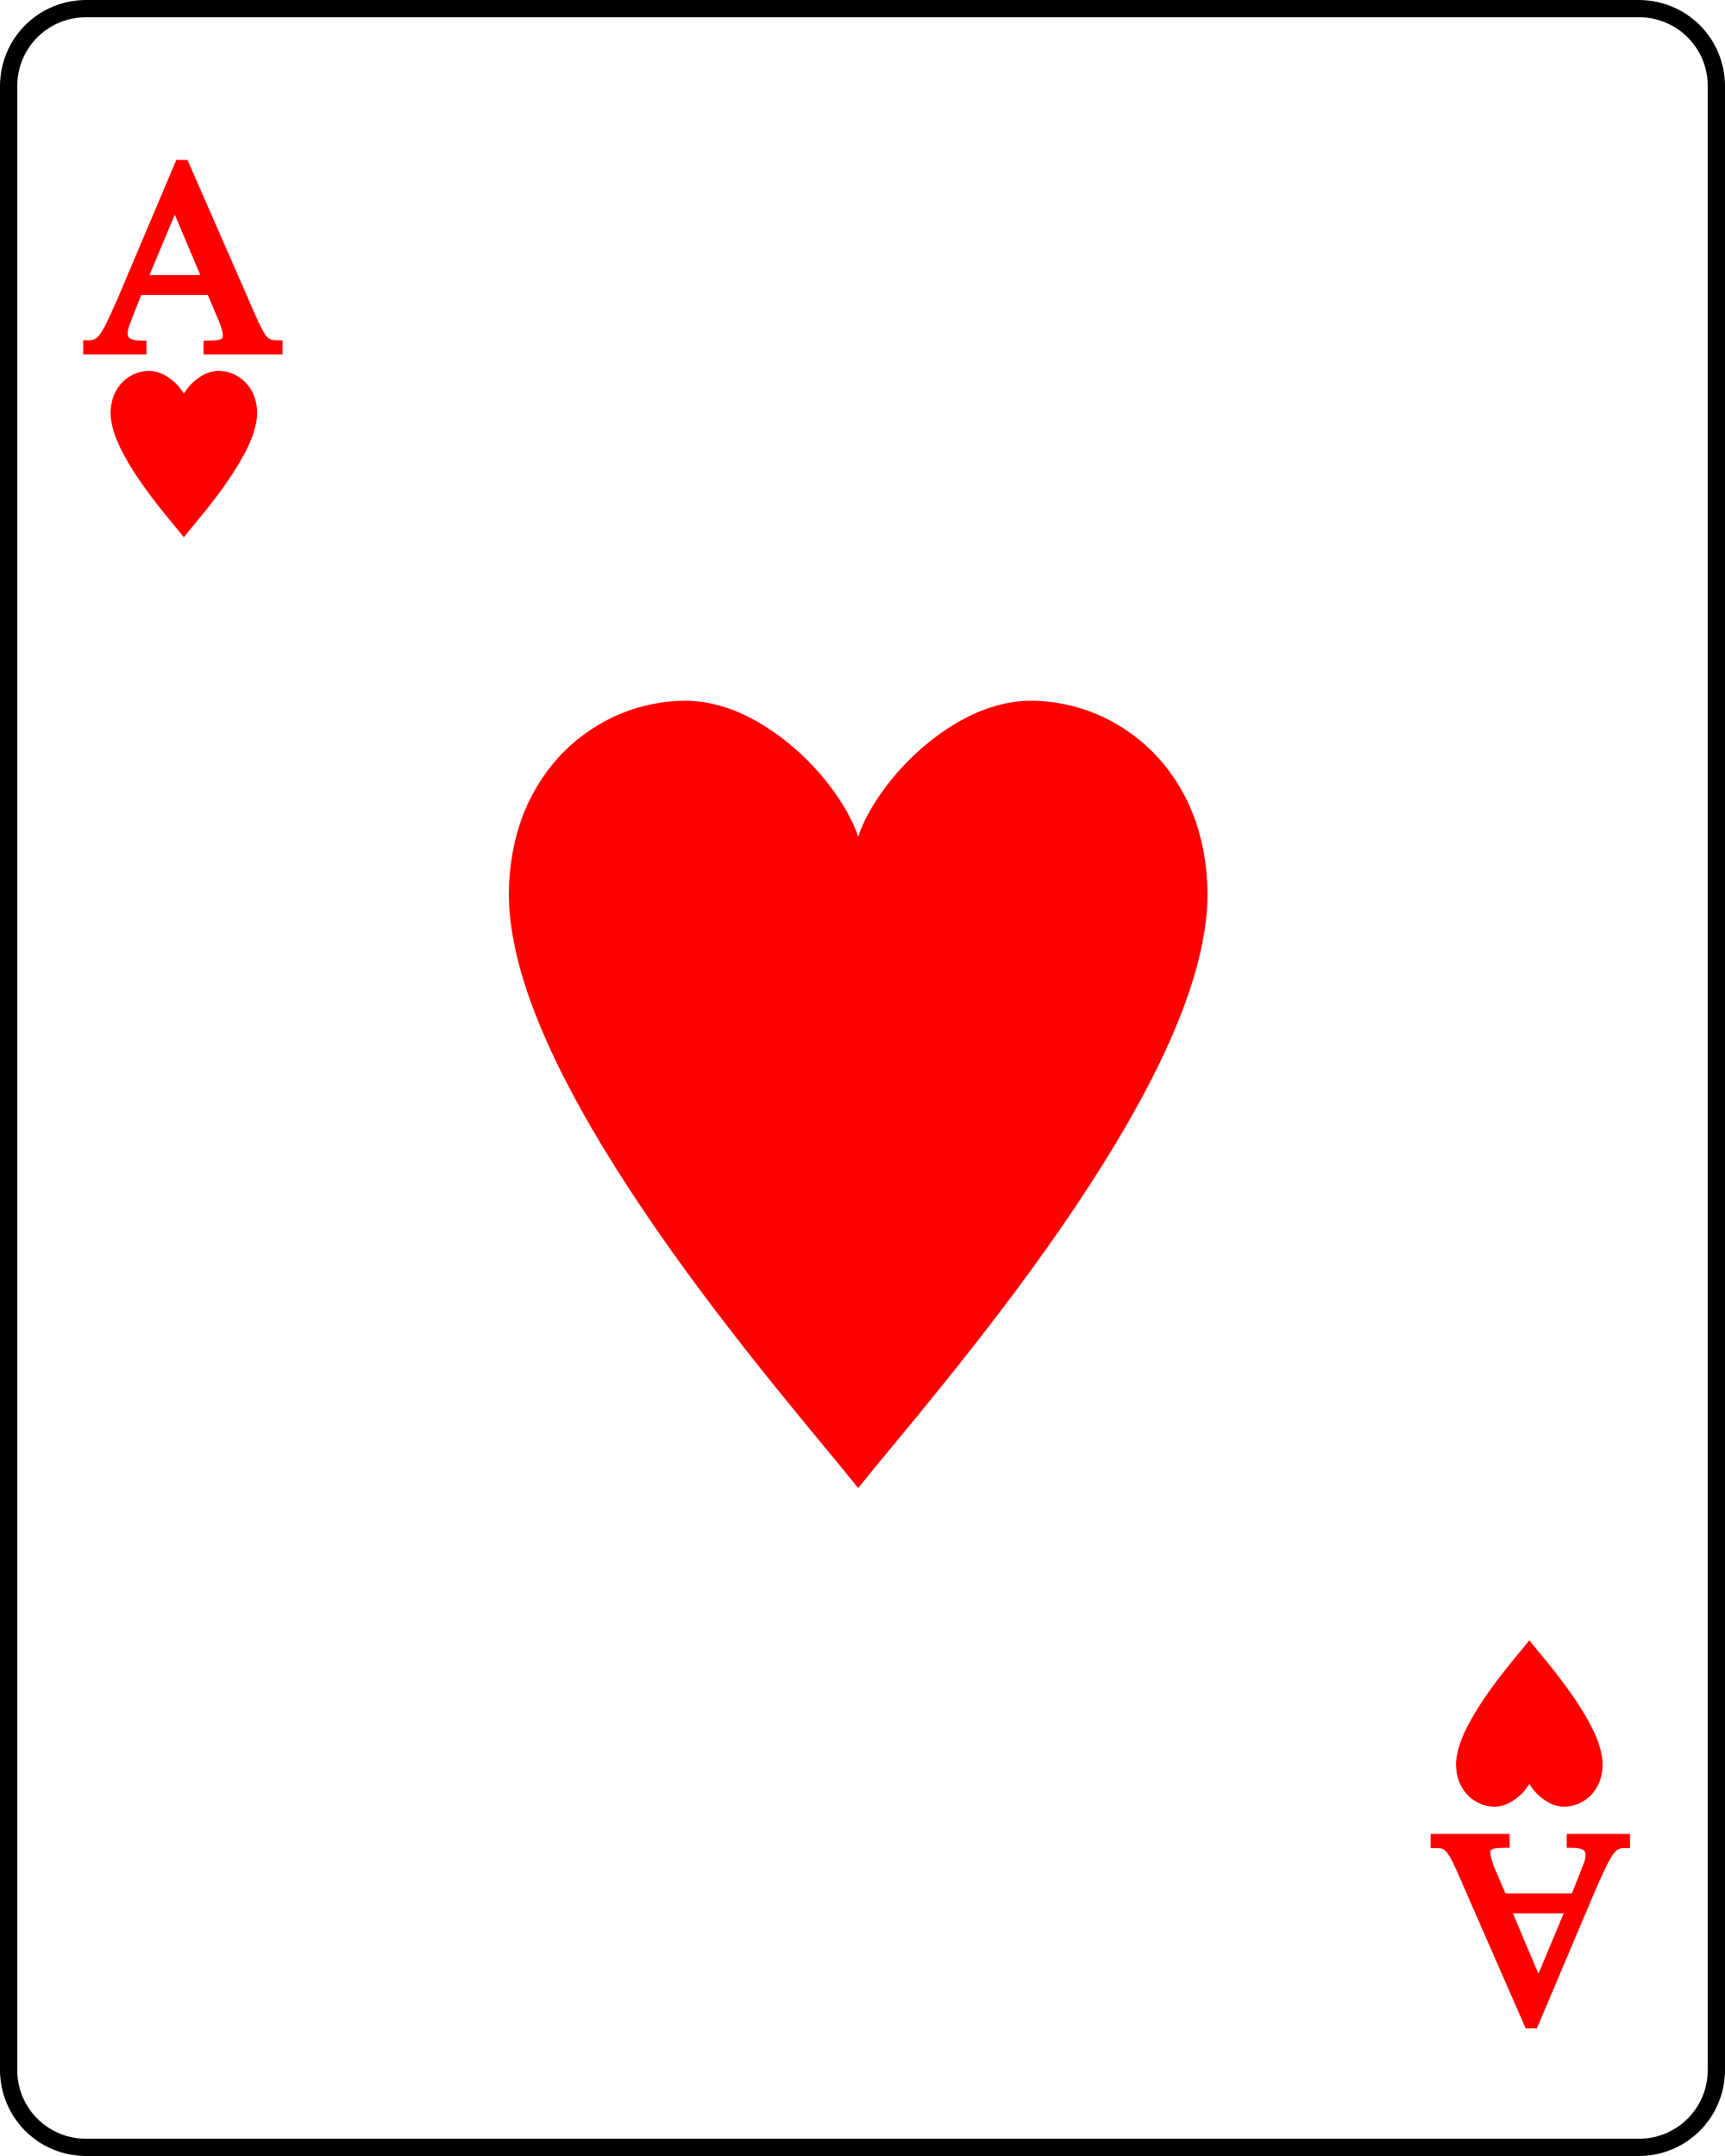 2000px-Playing_card_heart_A.svg